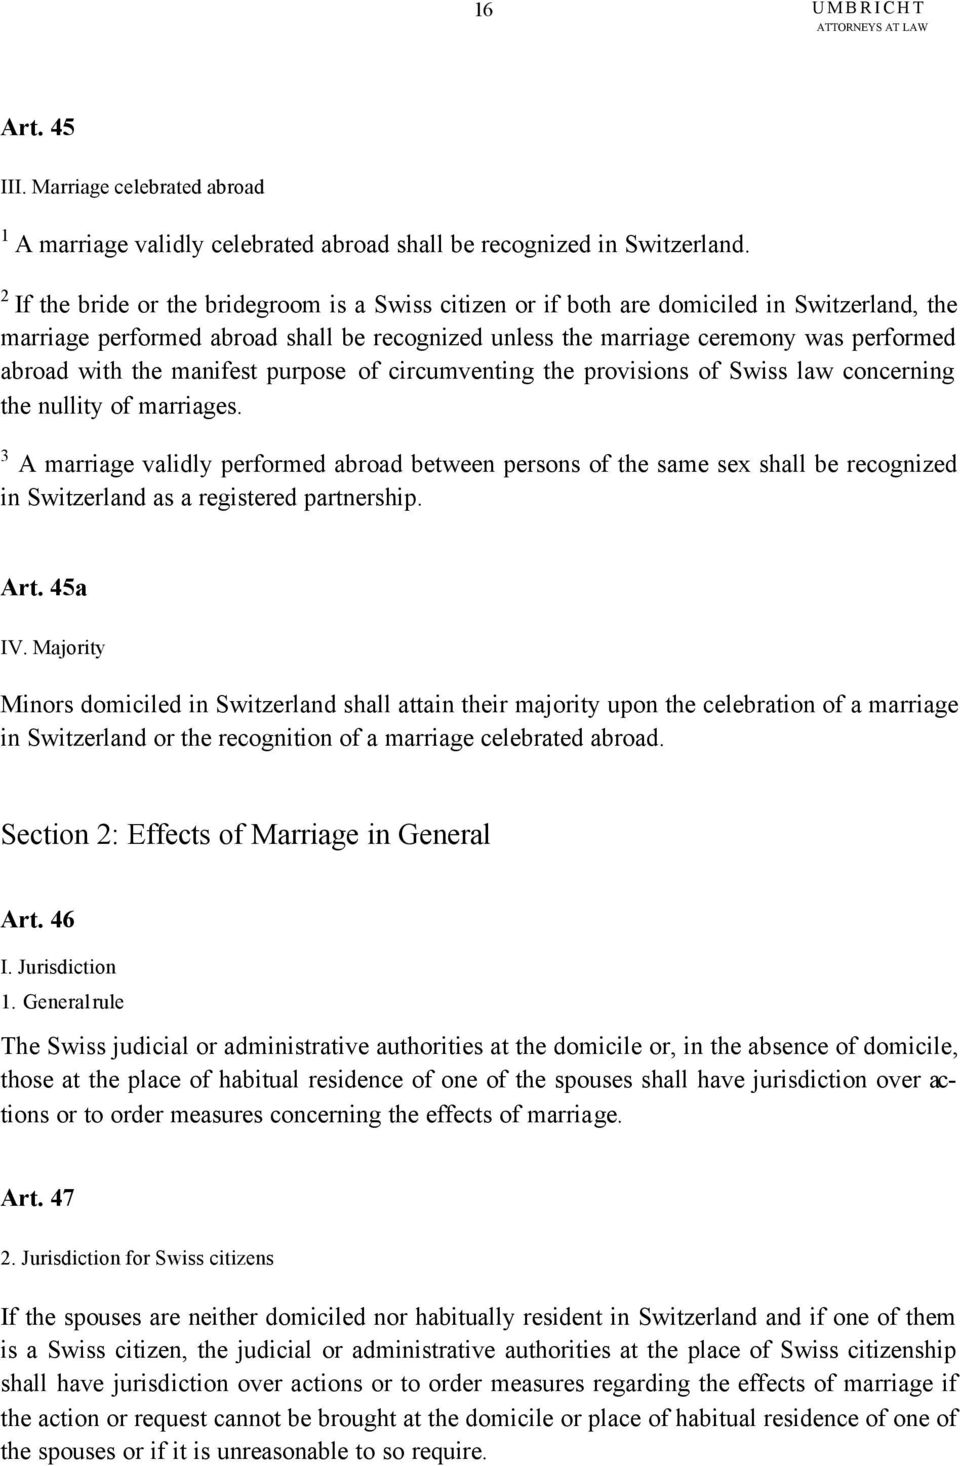 manifest purpose of circumventing the provisions of Swiss law concerning the nullity of marriages.